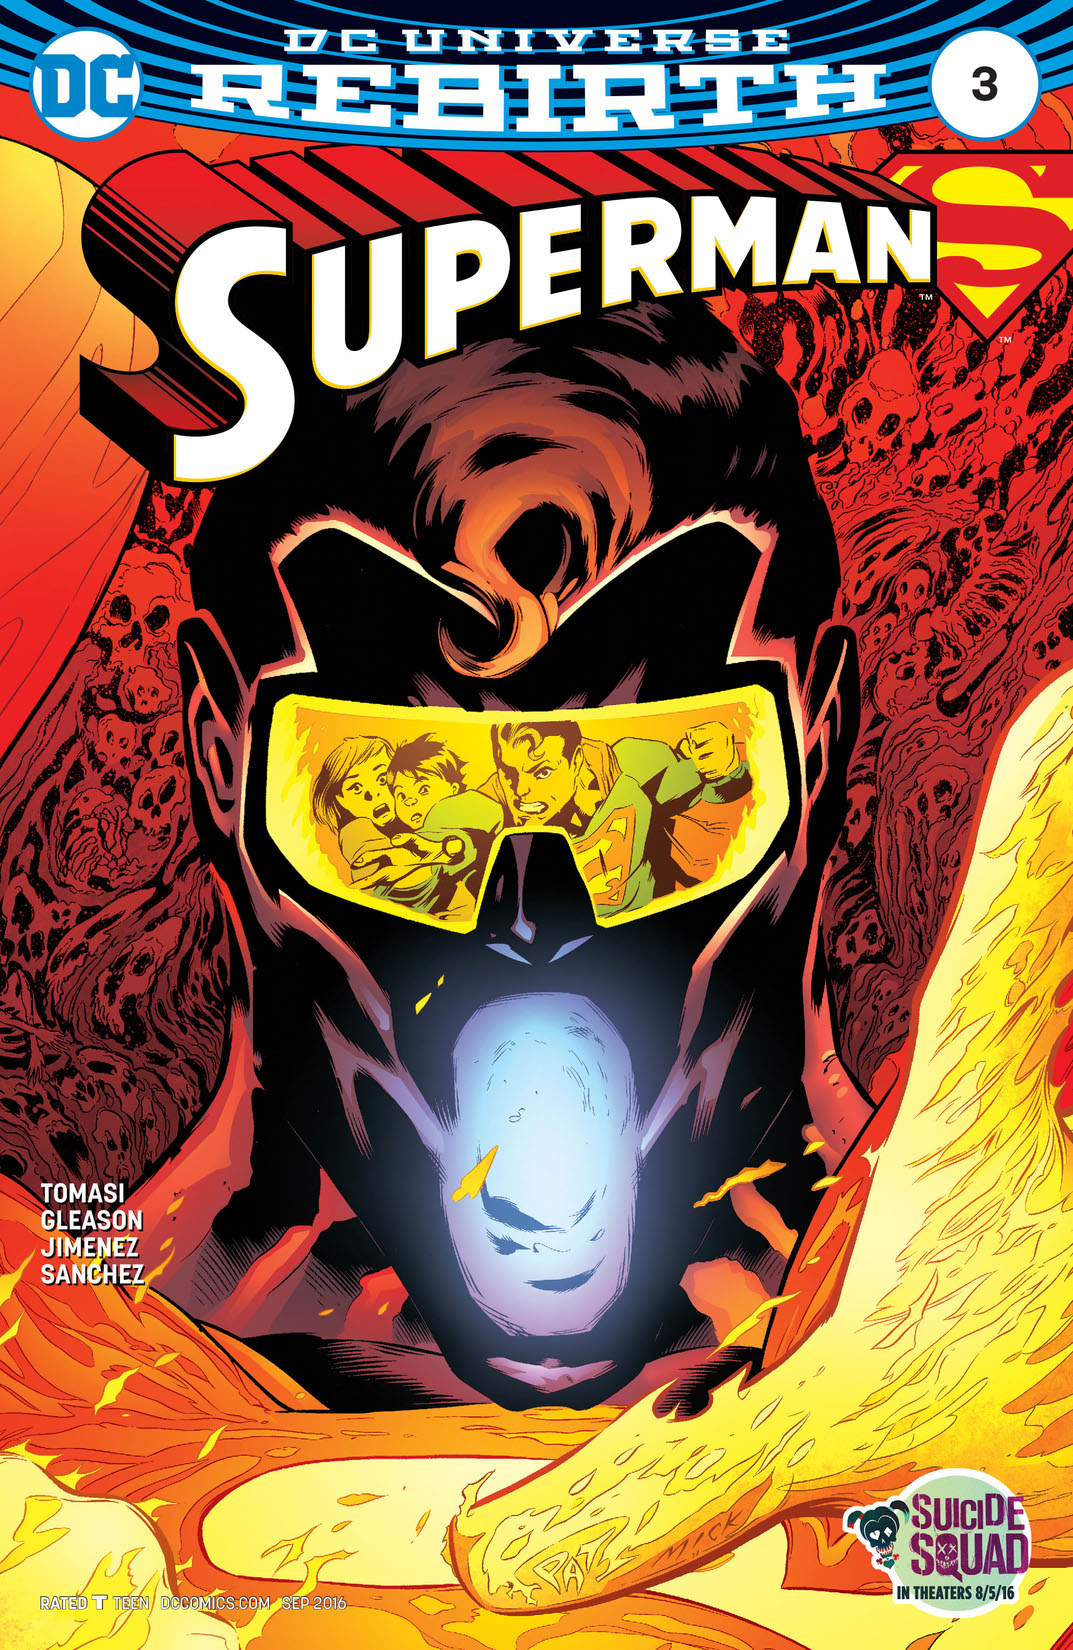 download the return of superman dc